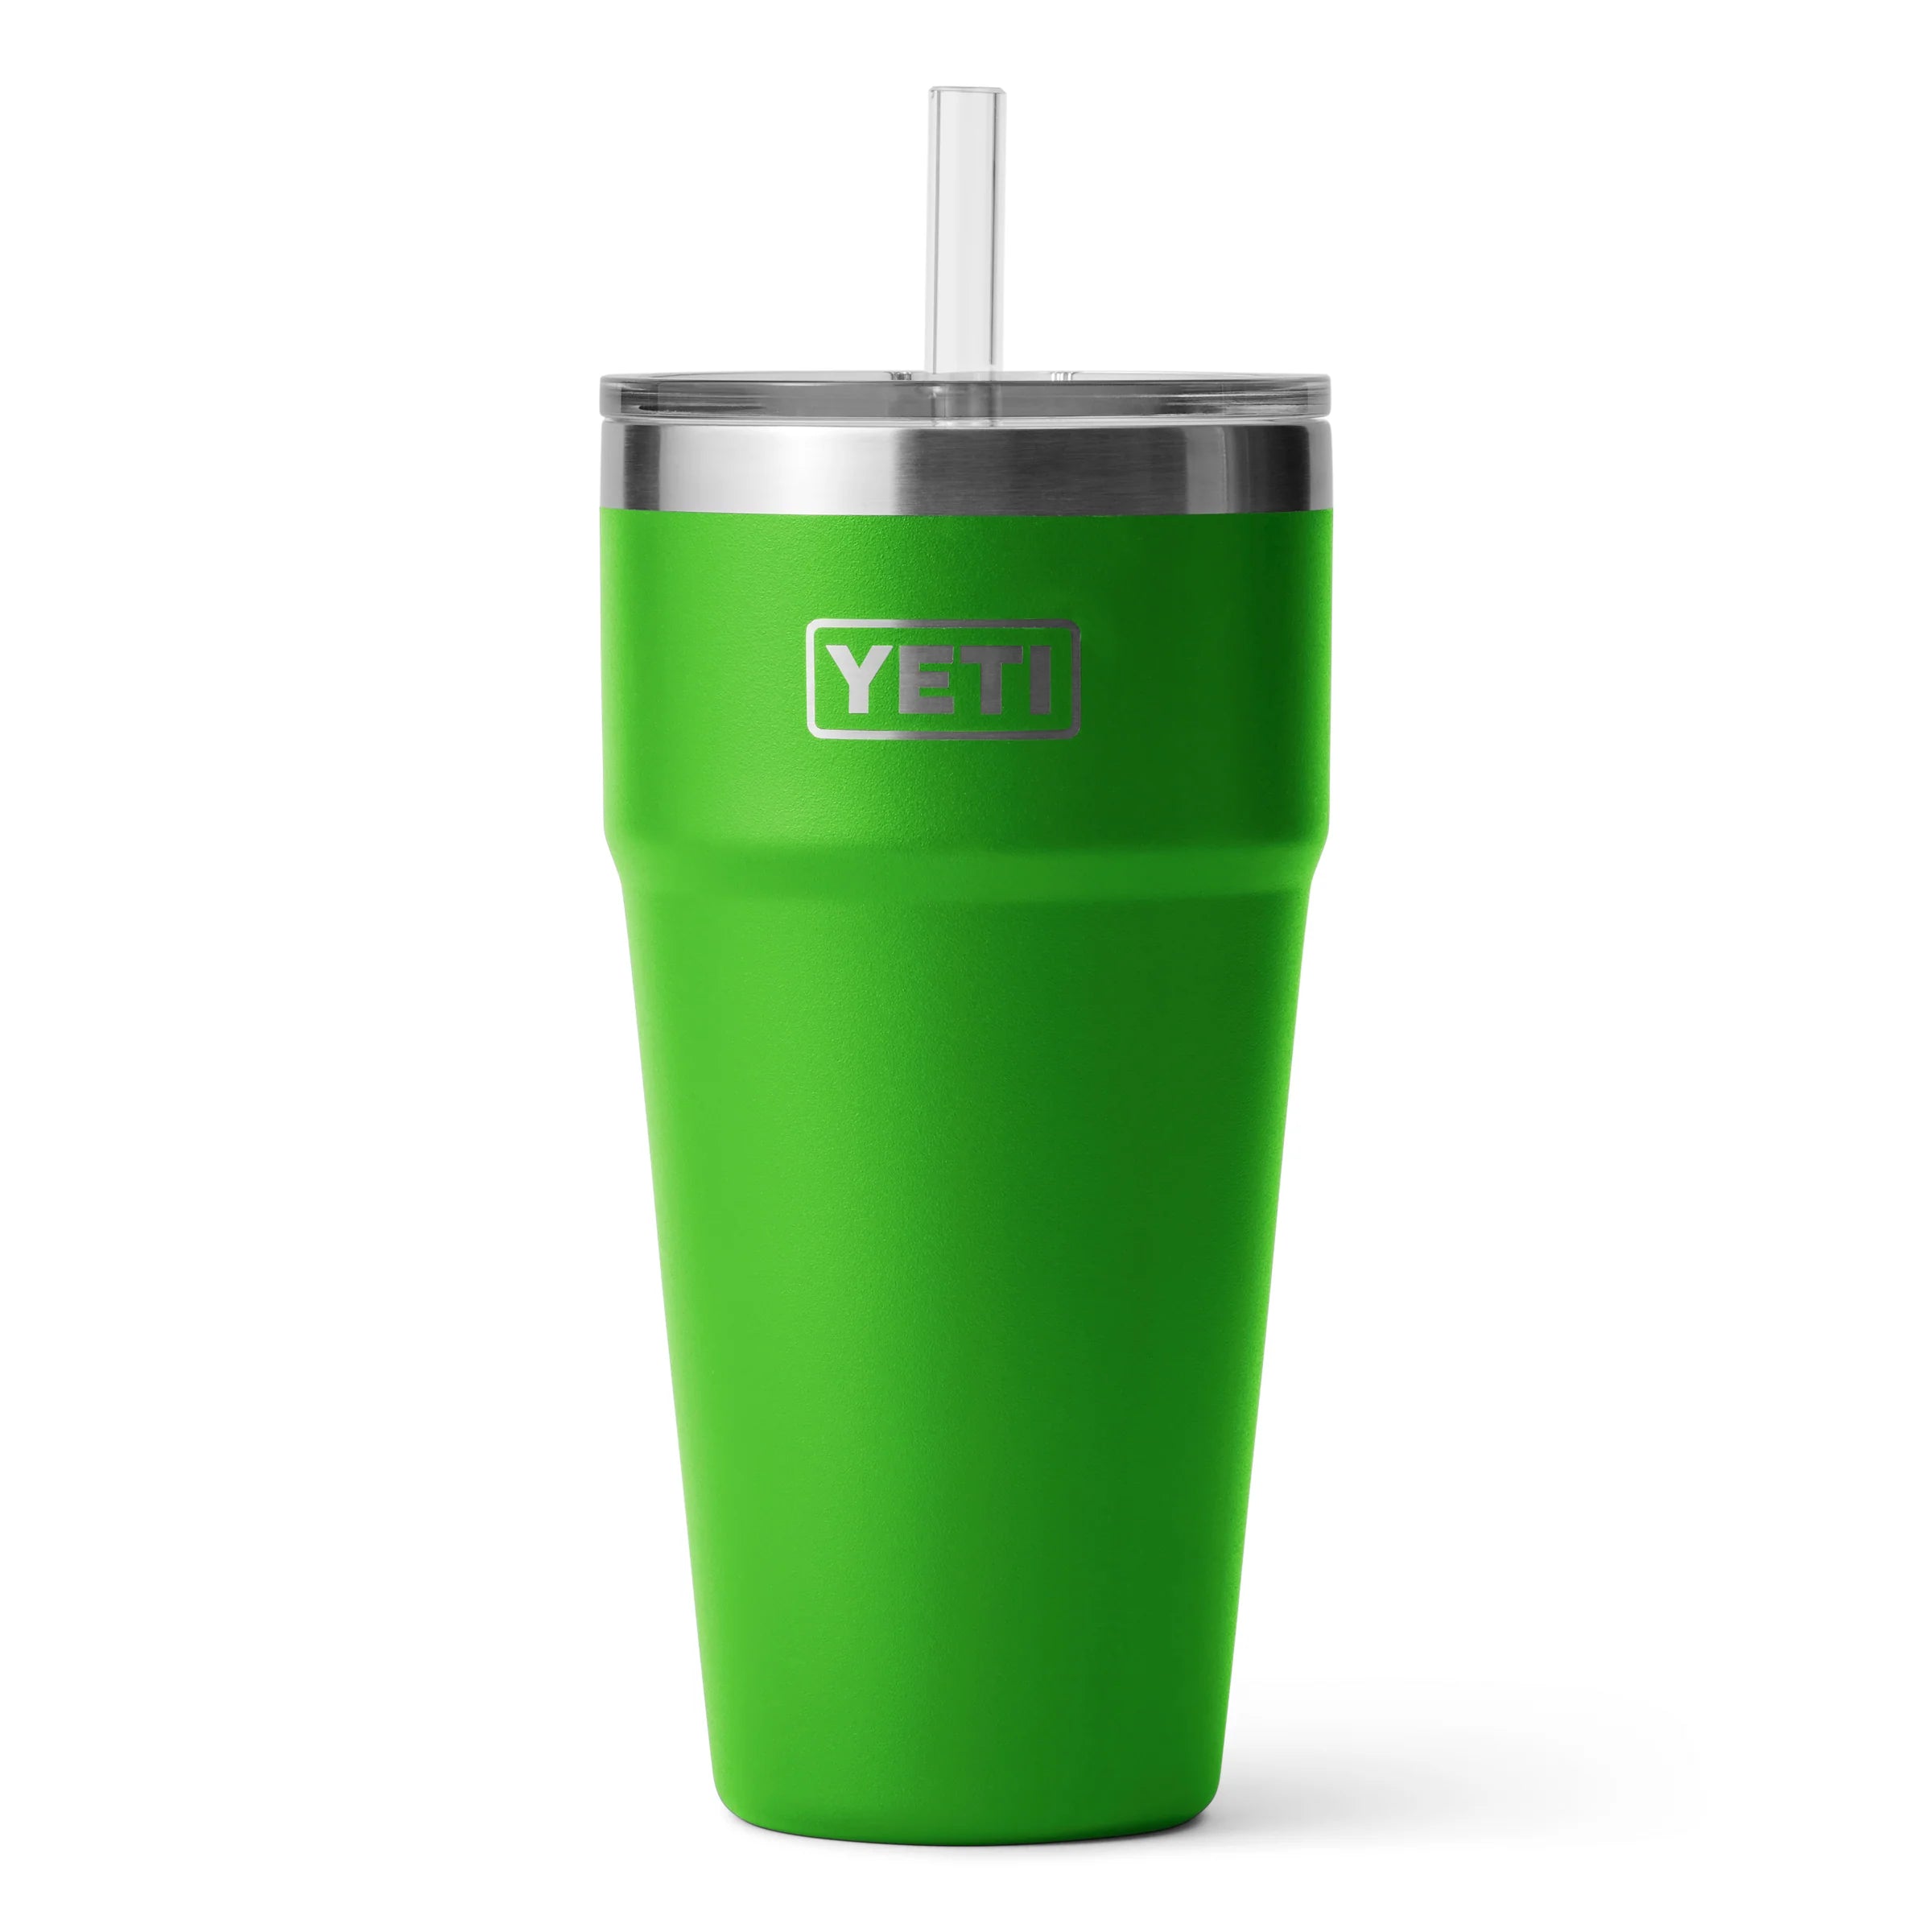 A YETI Rambler 26 oz Straw Cup in the limited edition color Canopy Green.